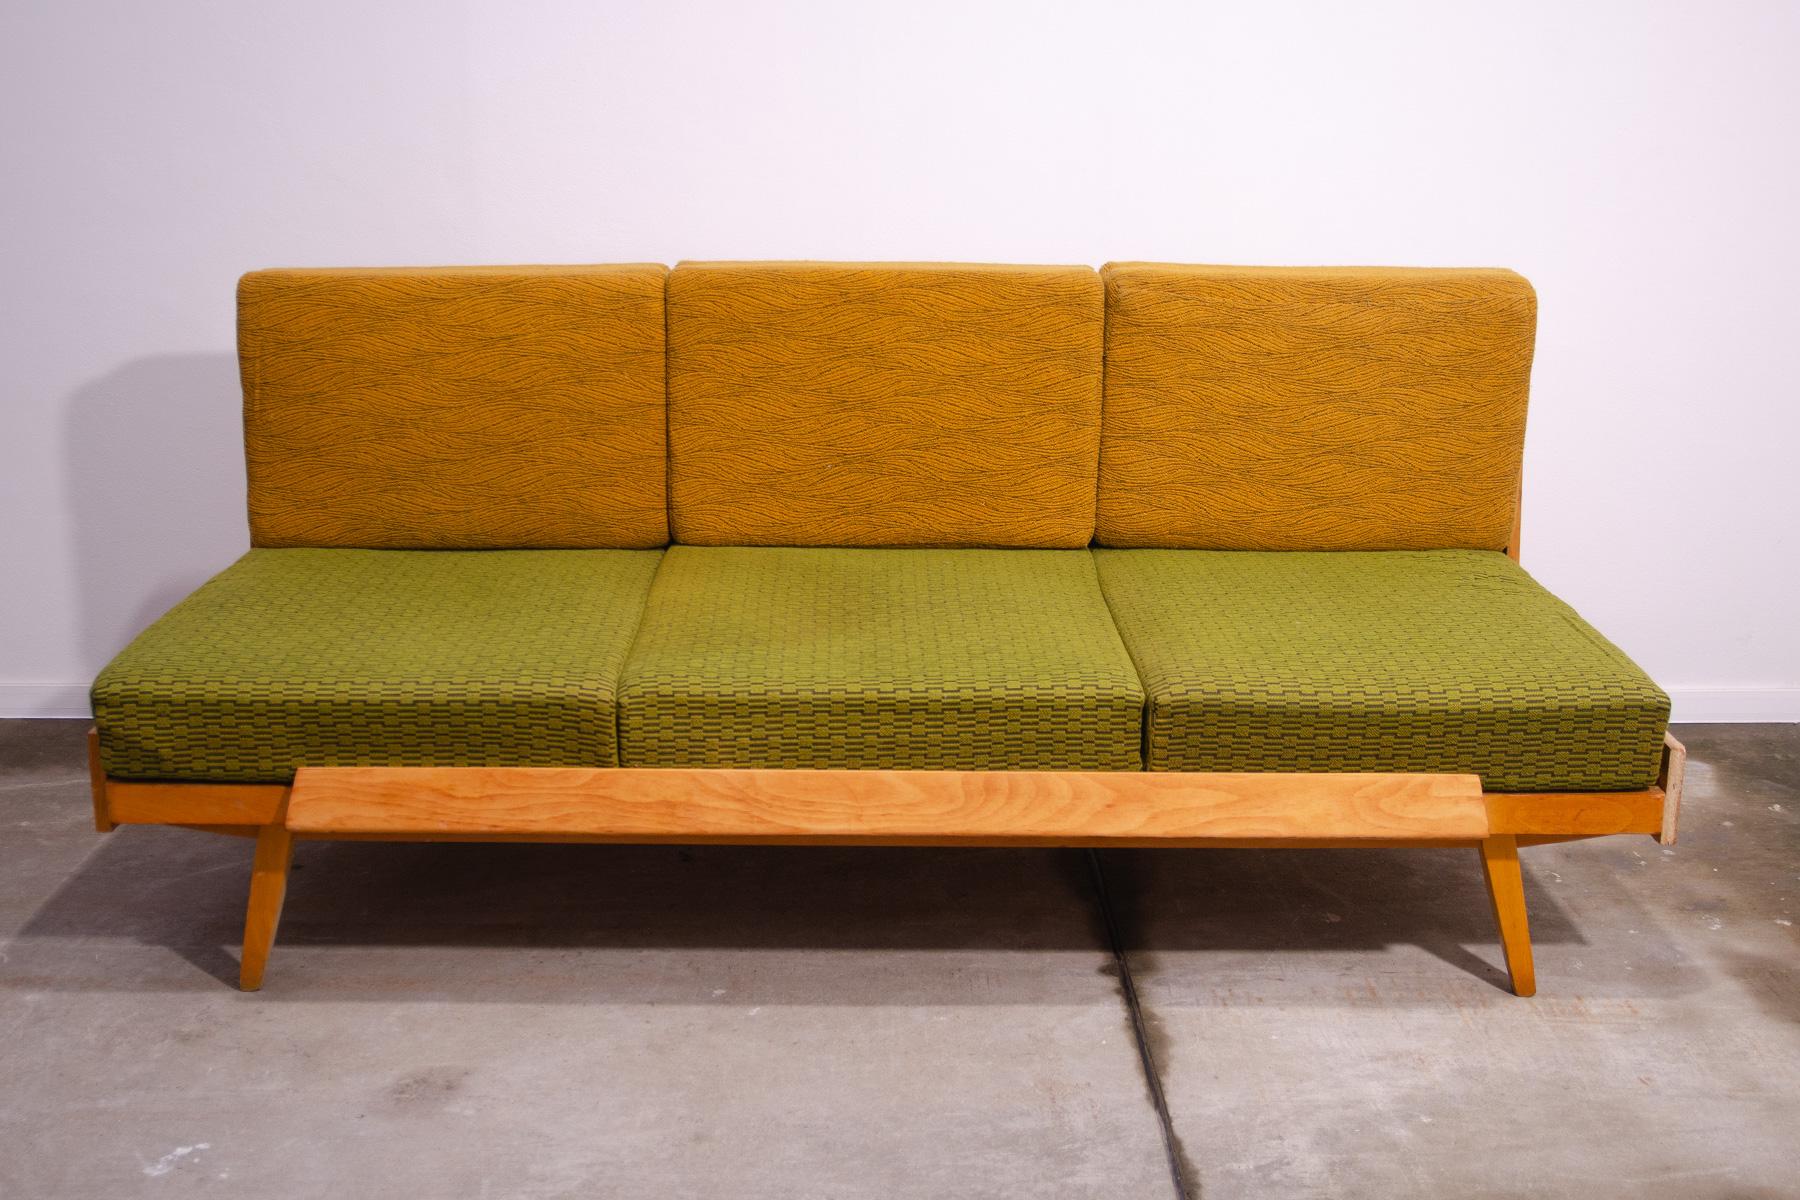 Mid century sofa bed,made in the former Czechoslovakia in the 1970´s. The sofa has a beechwood structure, it´s in good preserved Vintage condition, showing signs of age and using(as you can see in the photos).

Lenght:     199 cm

Height:     86